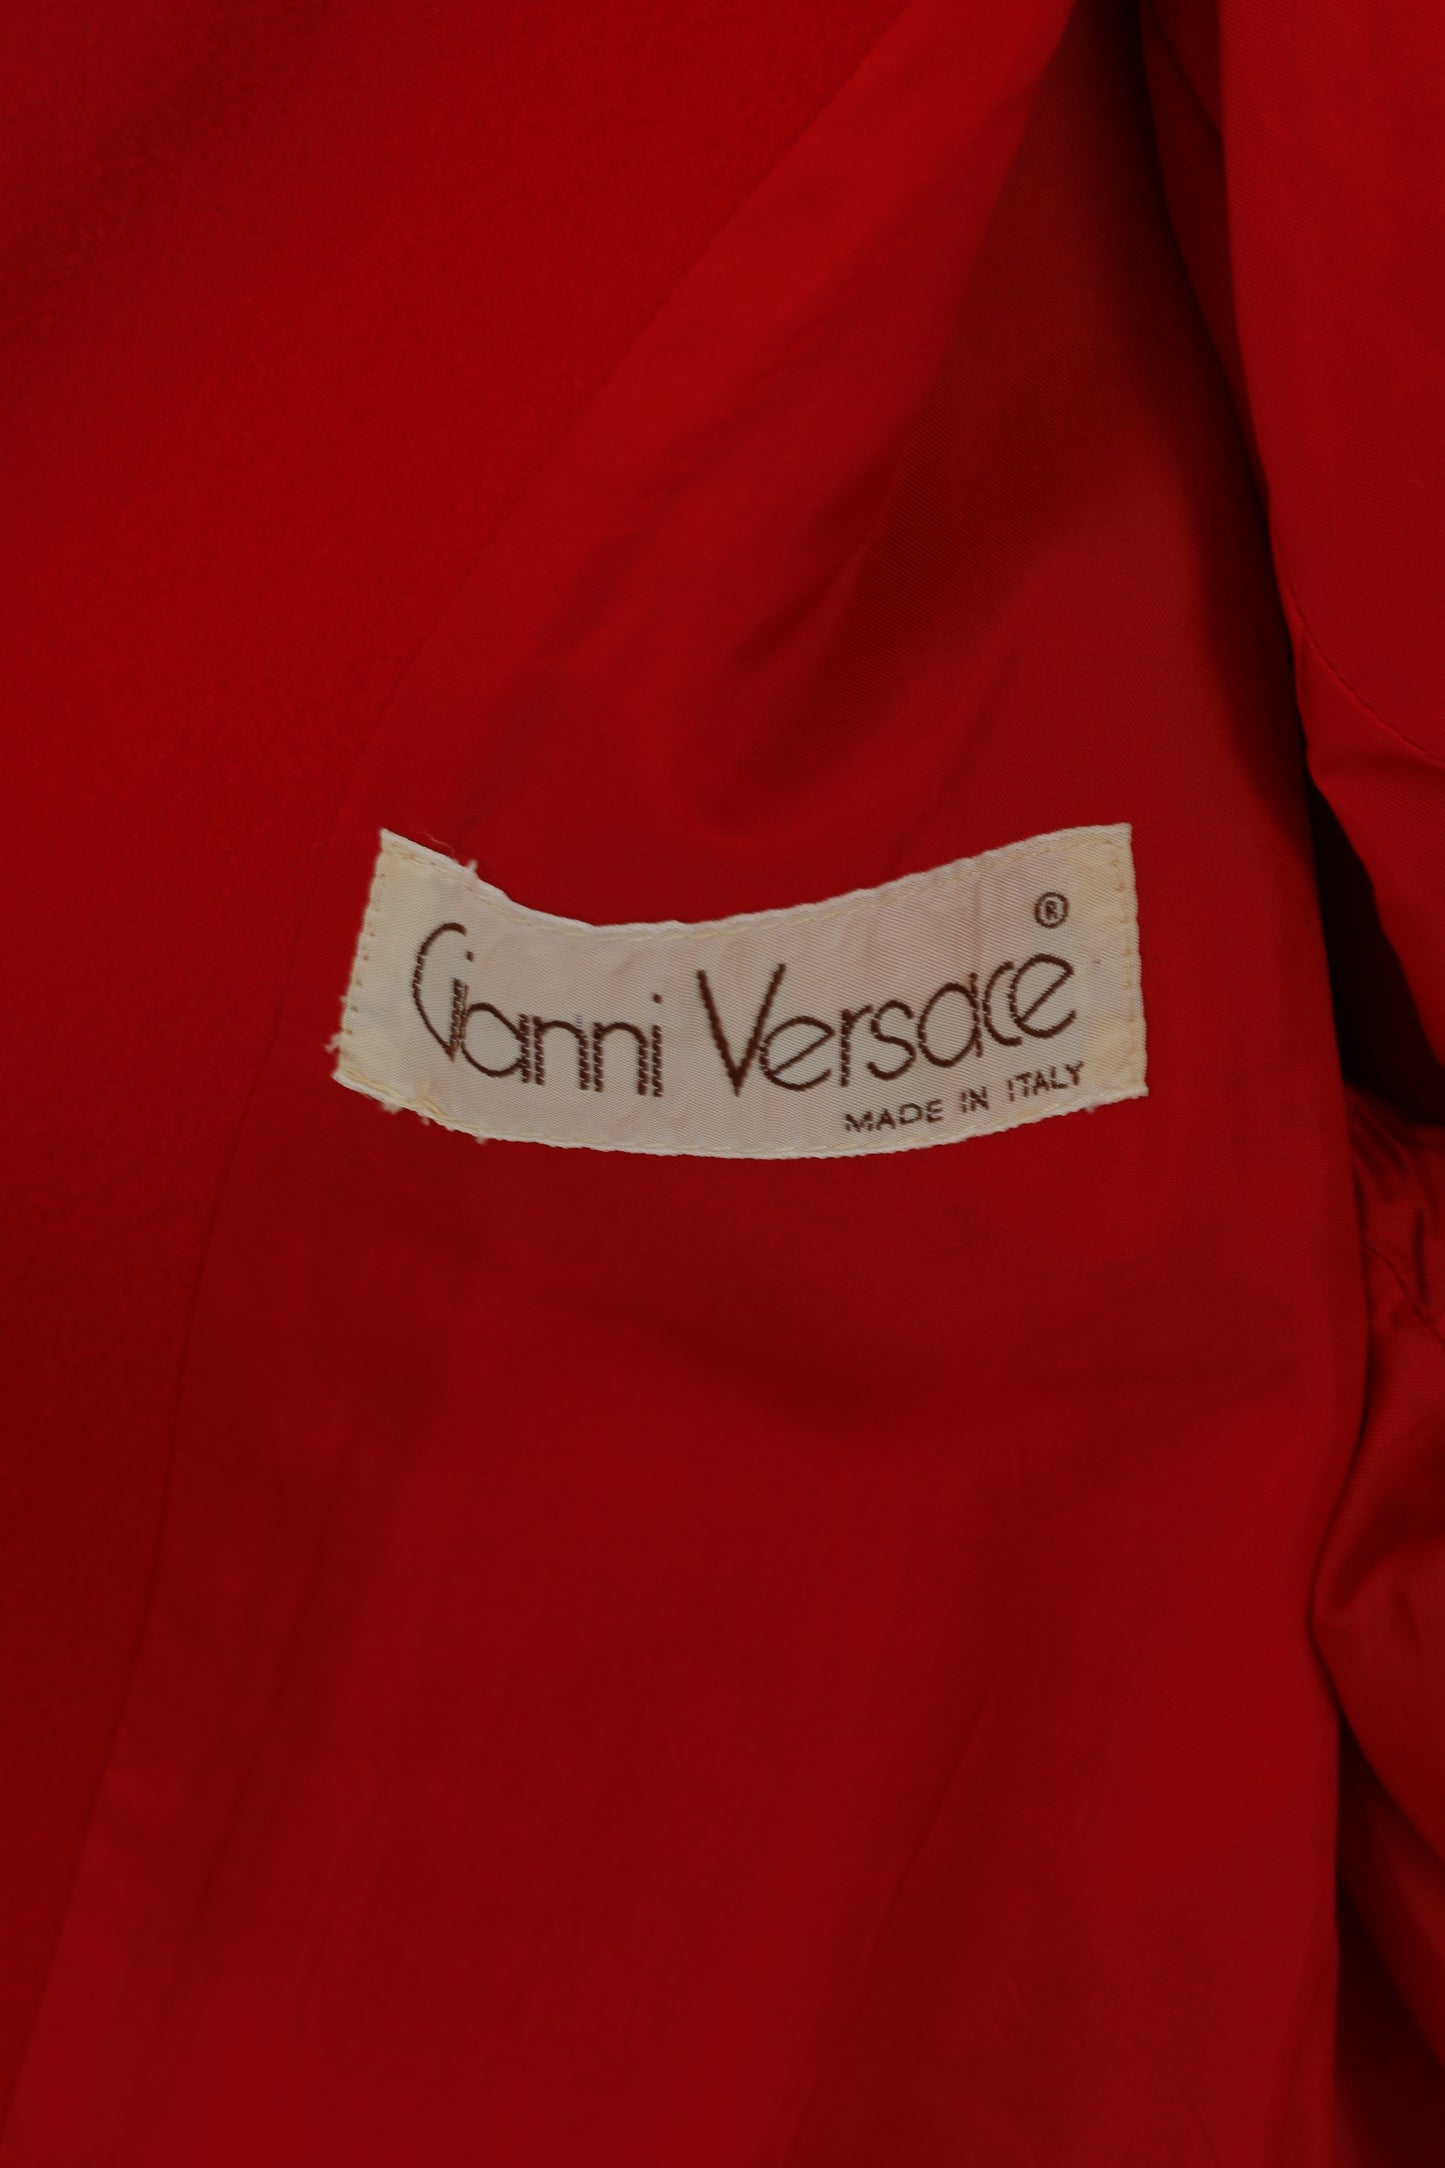 Gianni Versace Women 46 Blazer Vintage Red Wool Made in Italy 80s Jacket